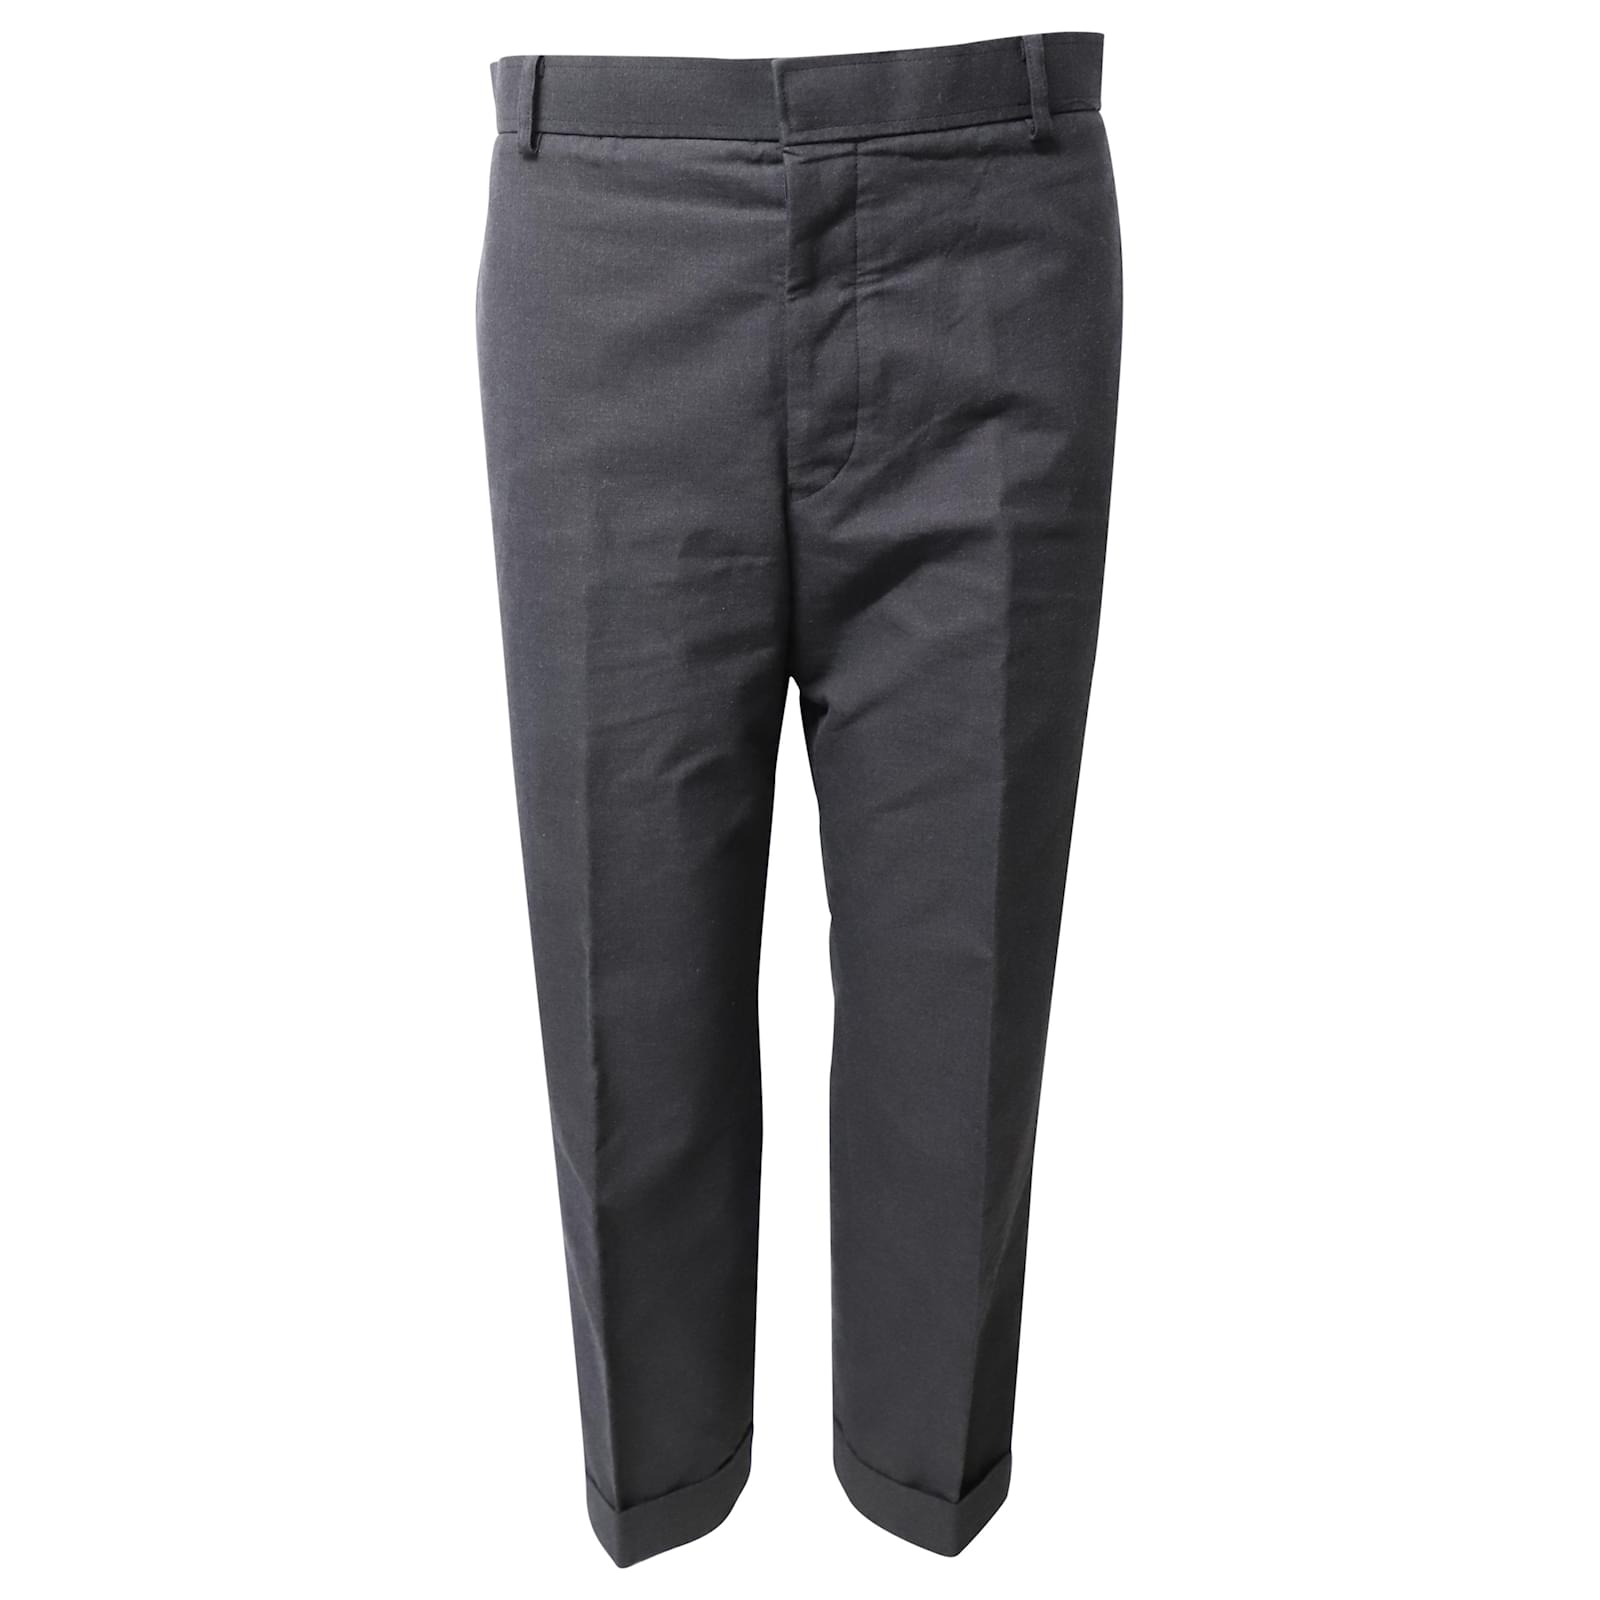 Thom Browne 4 Bar Plain Weave Trousers  Clothing from Circle Fashion UK